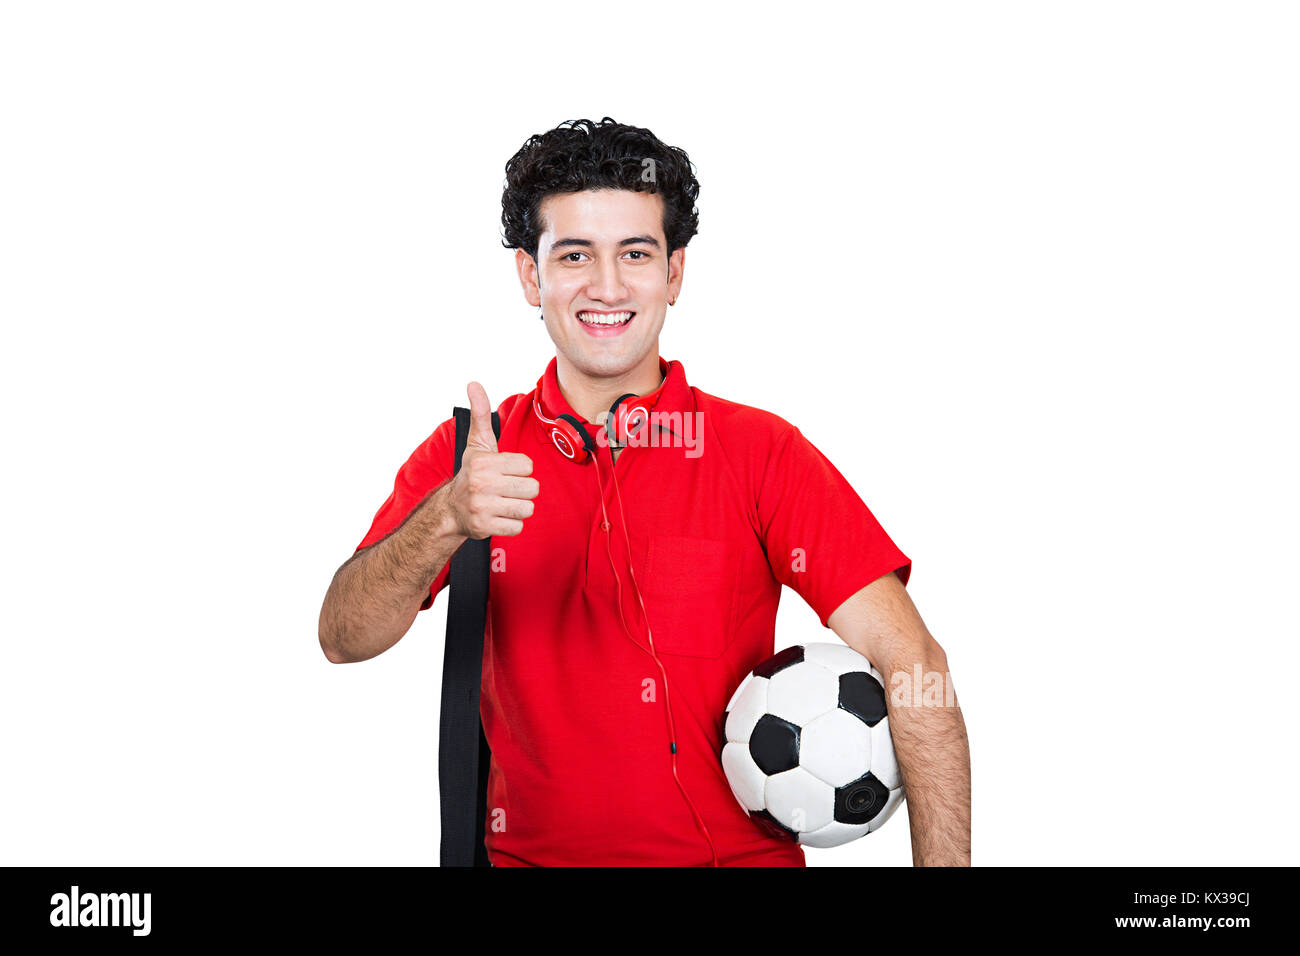 1 Indian College Student Boy Holding Football Showing Thumbs up Stock Photo